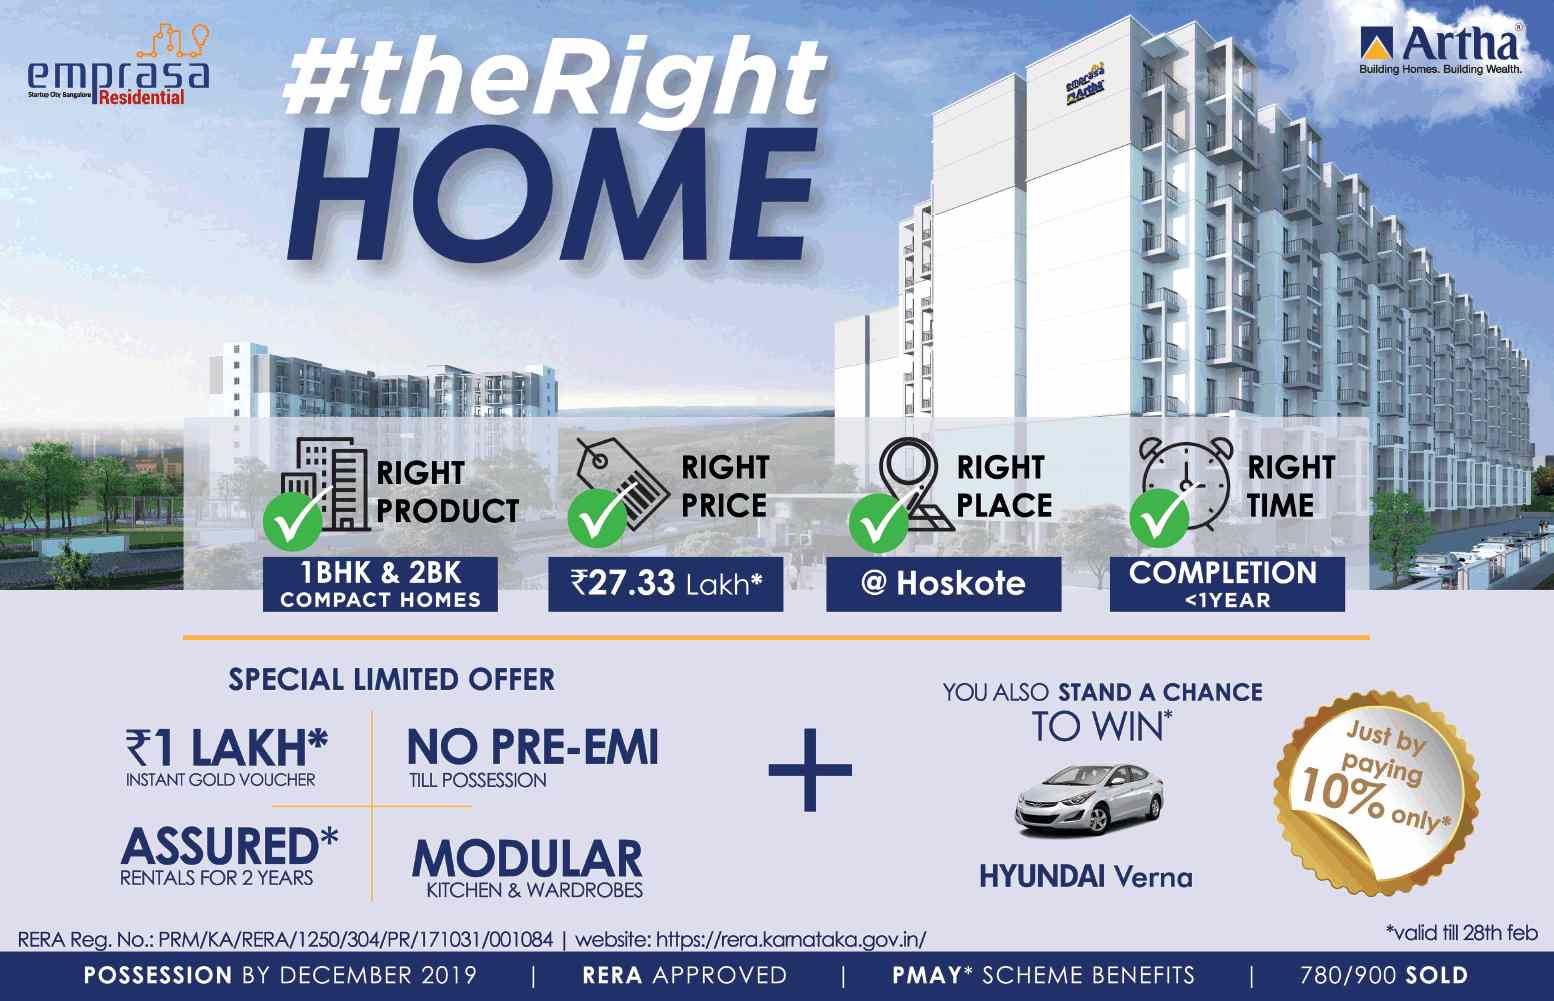 Stand a chance to win Hyundai Verna by booking your home at Artha Emprasa in Bangalore Update